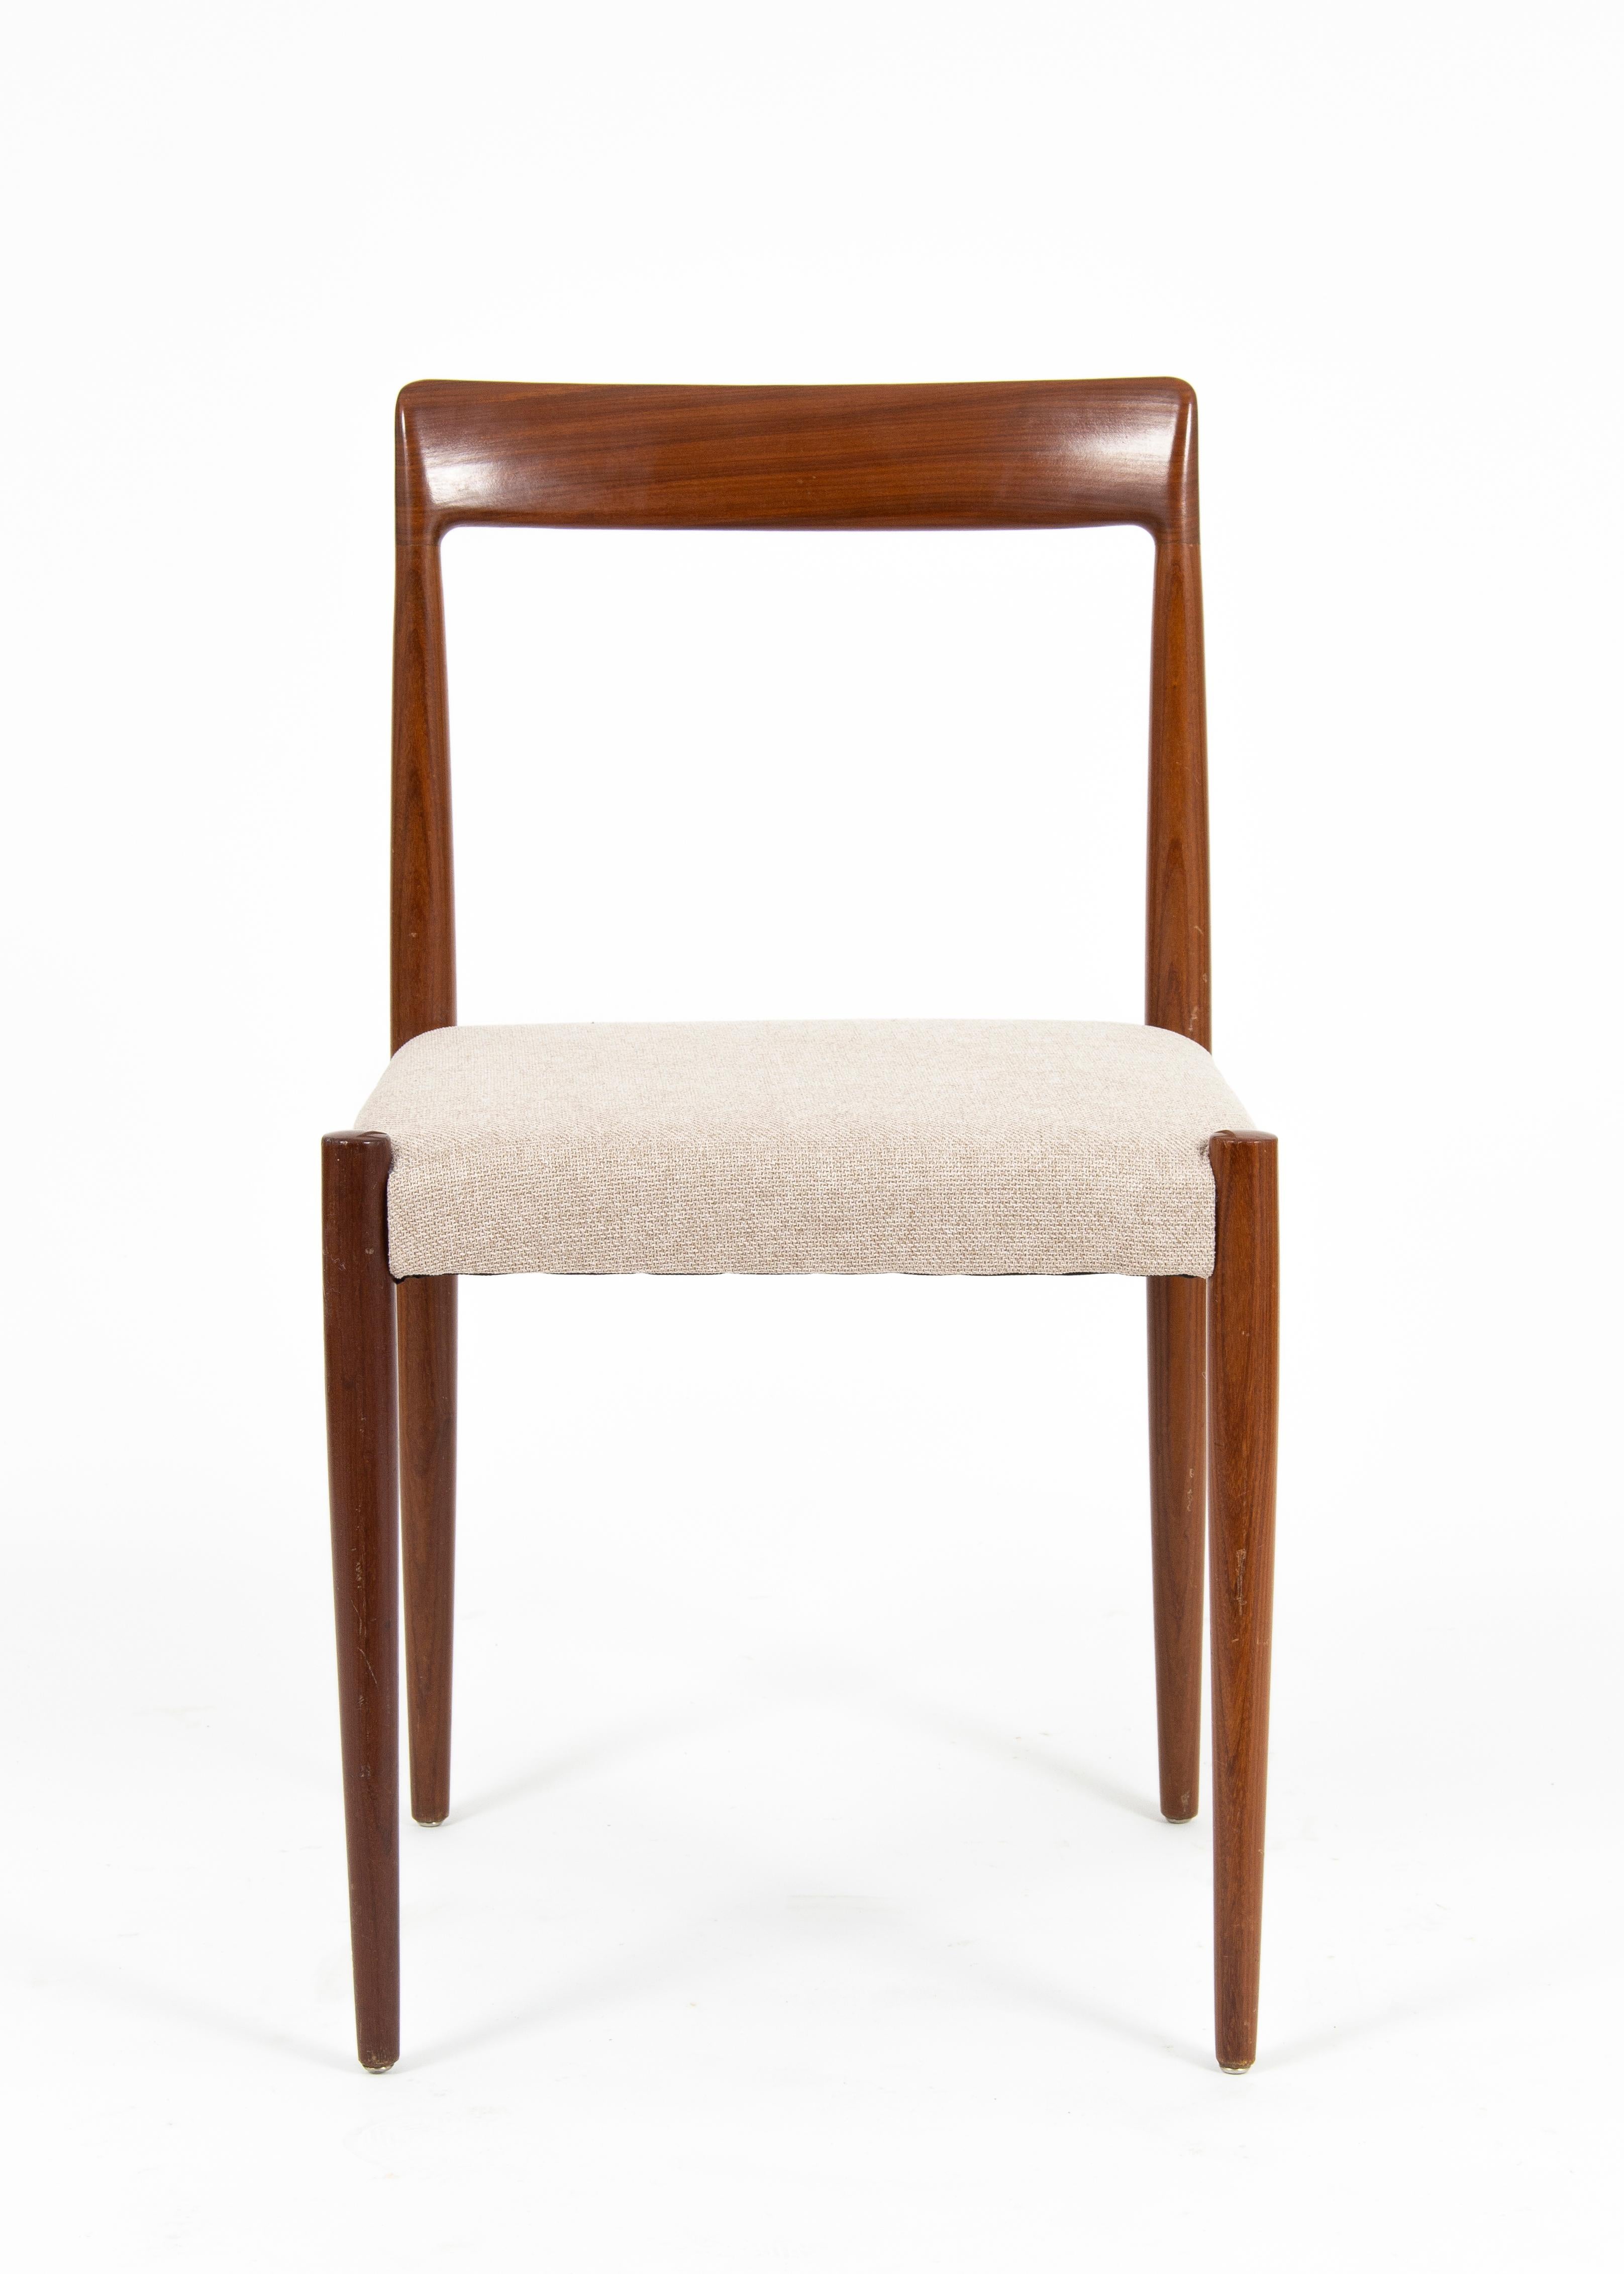 Modern dining chairs designed by Karel Vycítal in 1970s' Czechoslovakia.
Manufactured by Drevotvar Jablonné nad Orlici.
The set consists of 4 pieces.